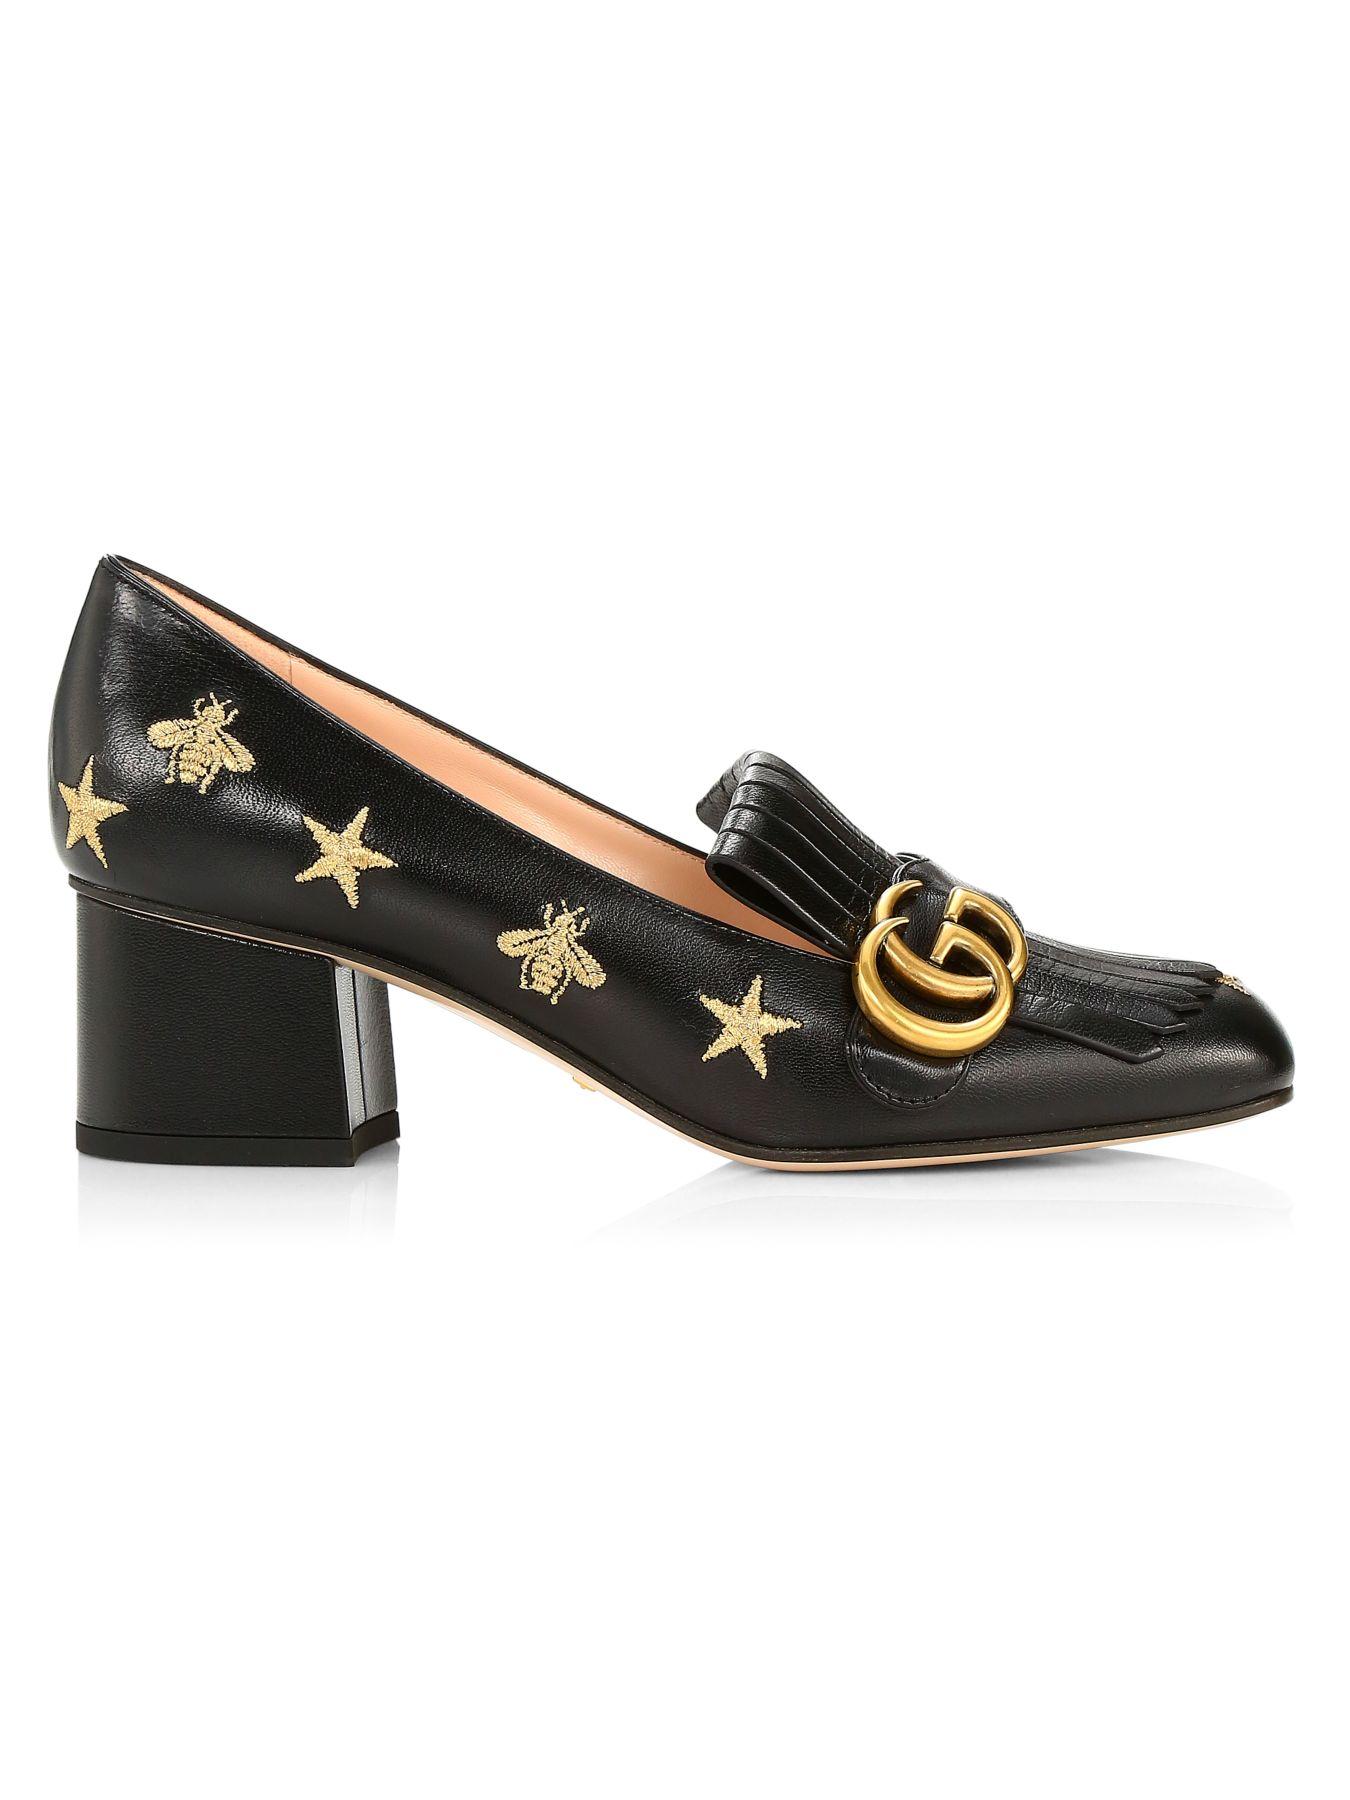 Gucci Leather Star Marmont Pumps in Black - Lyst